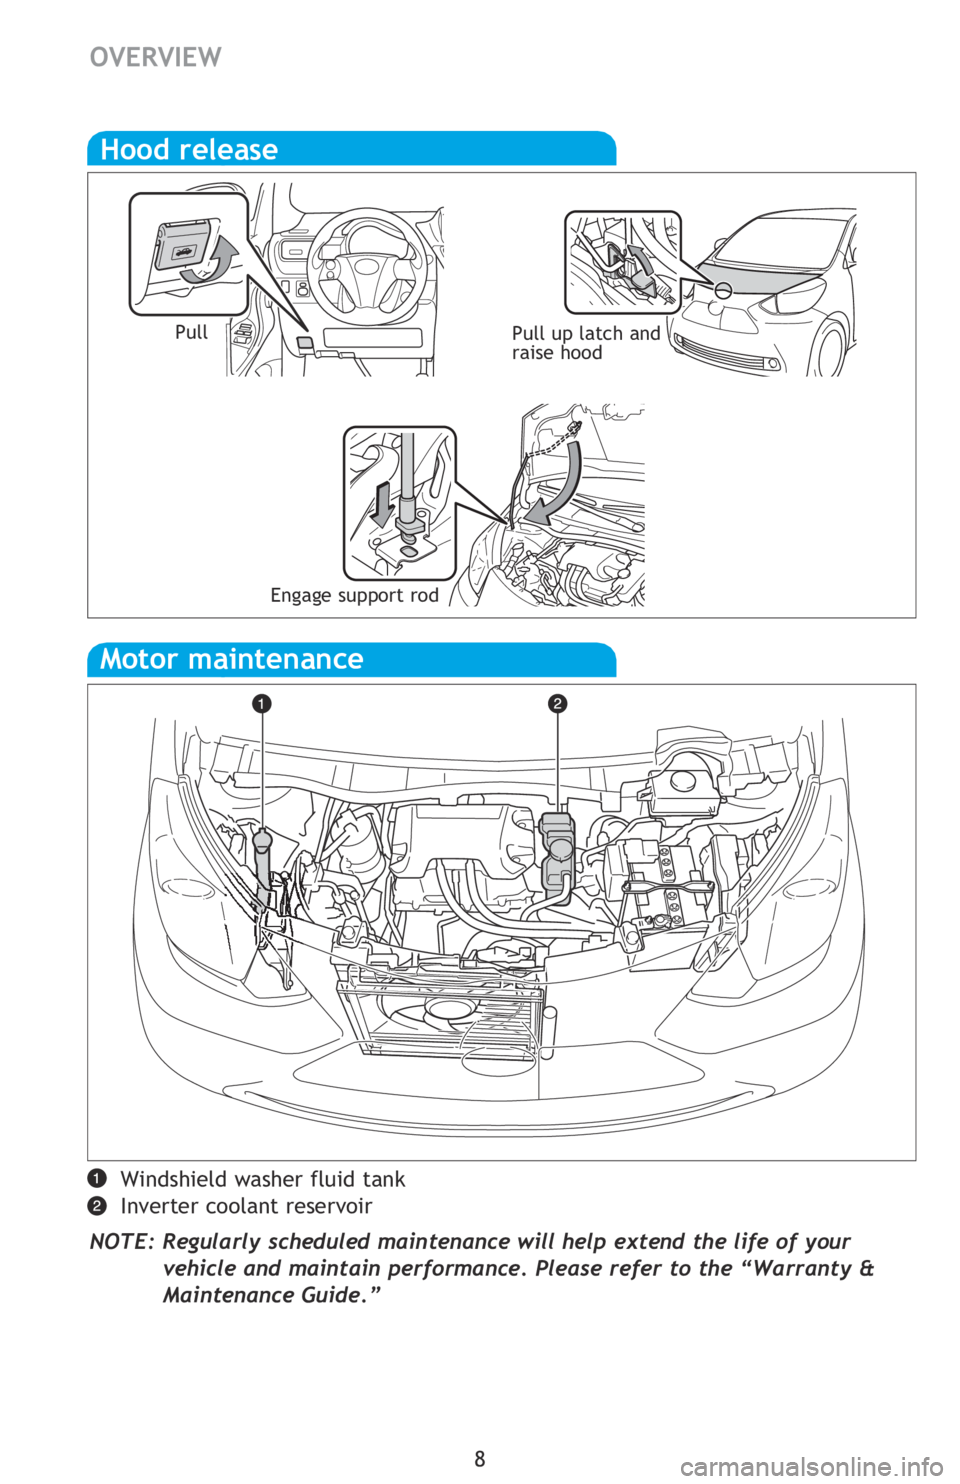 TOYOTA iQ EV 2013  Owners Manual (in English) 8
Hood release
PullPull up latch and 
raise hood
Windshield washer fluid tank
Inverter coolant reservoir
NOTE: Regularly scheduled maintenance will help extend the life of your  vehicle and maintain p